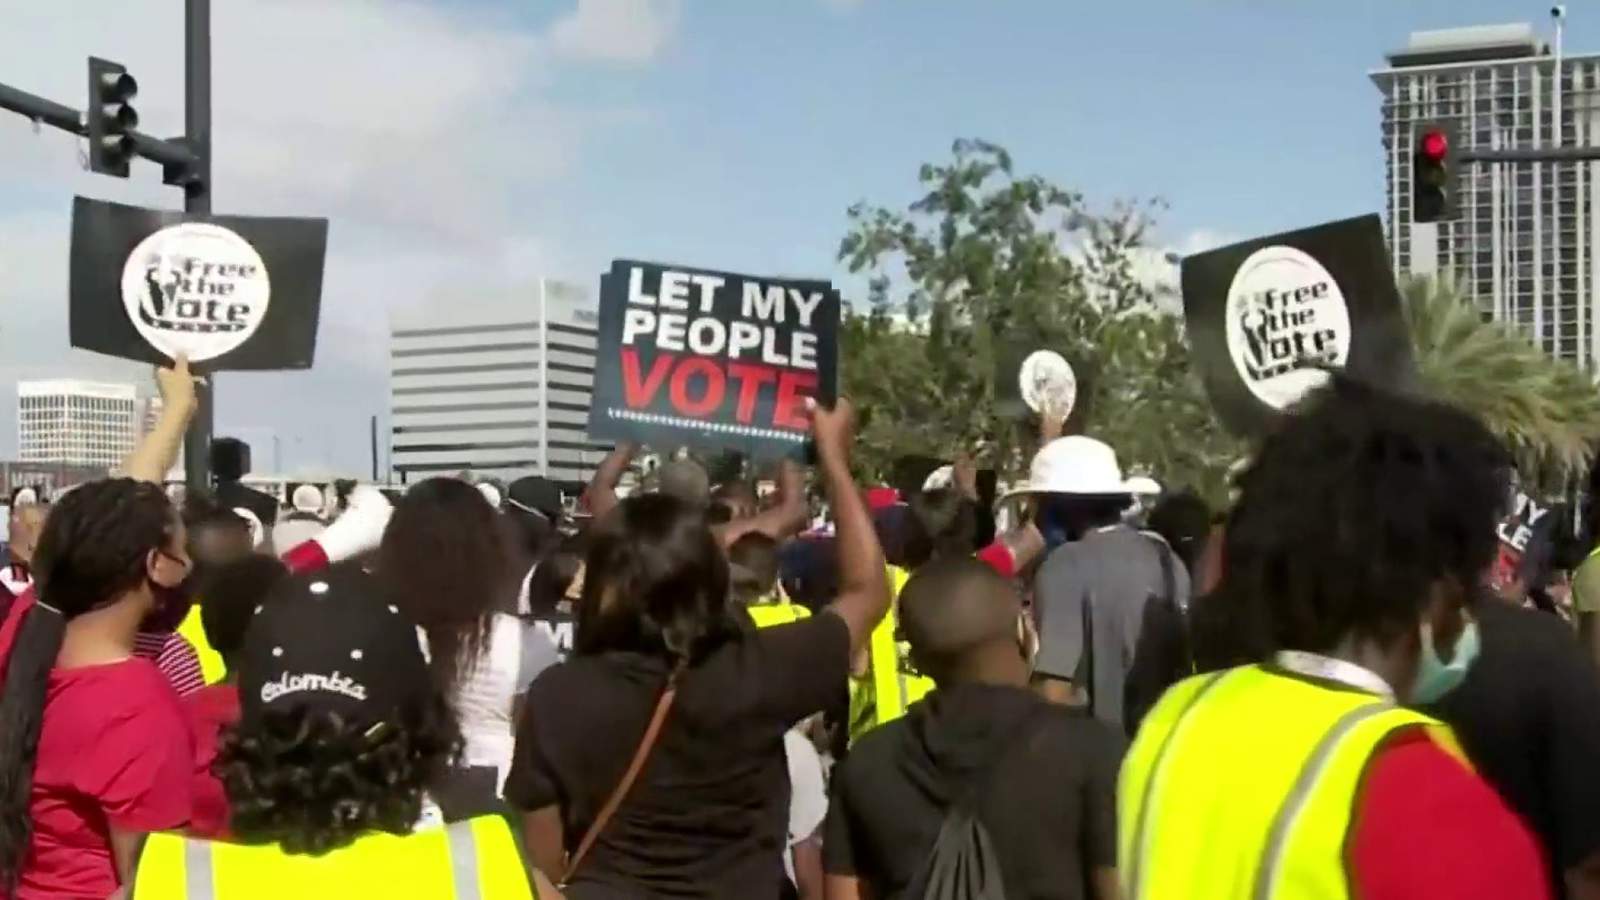 Hundreds gather to rally returning citizens to vote early in Orlando